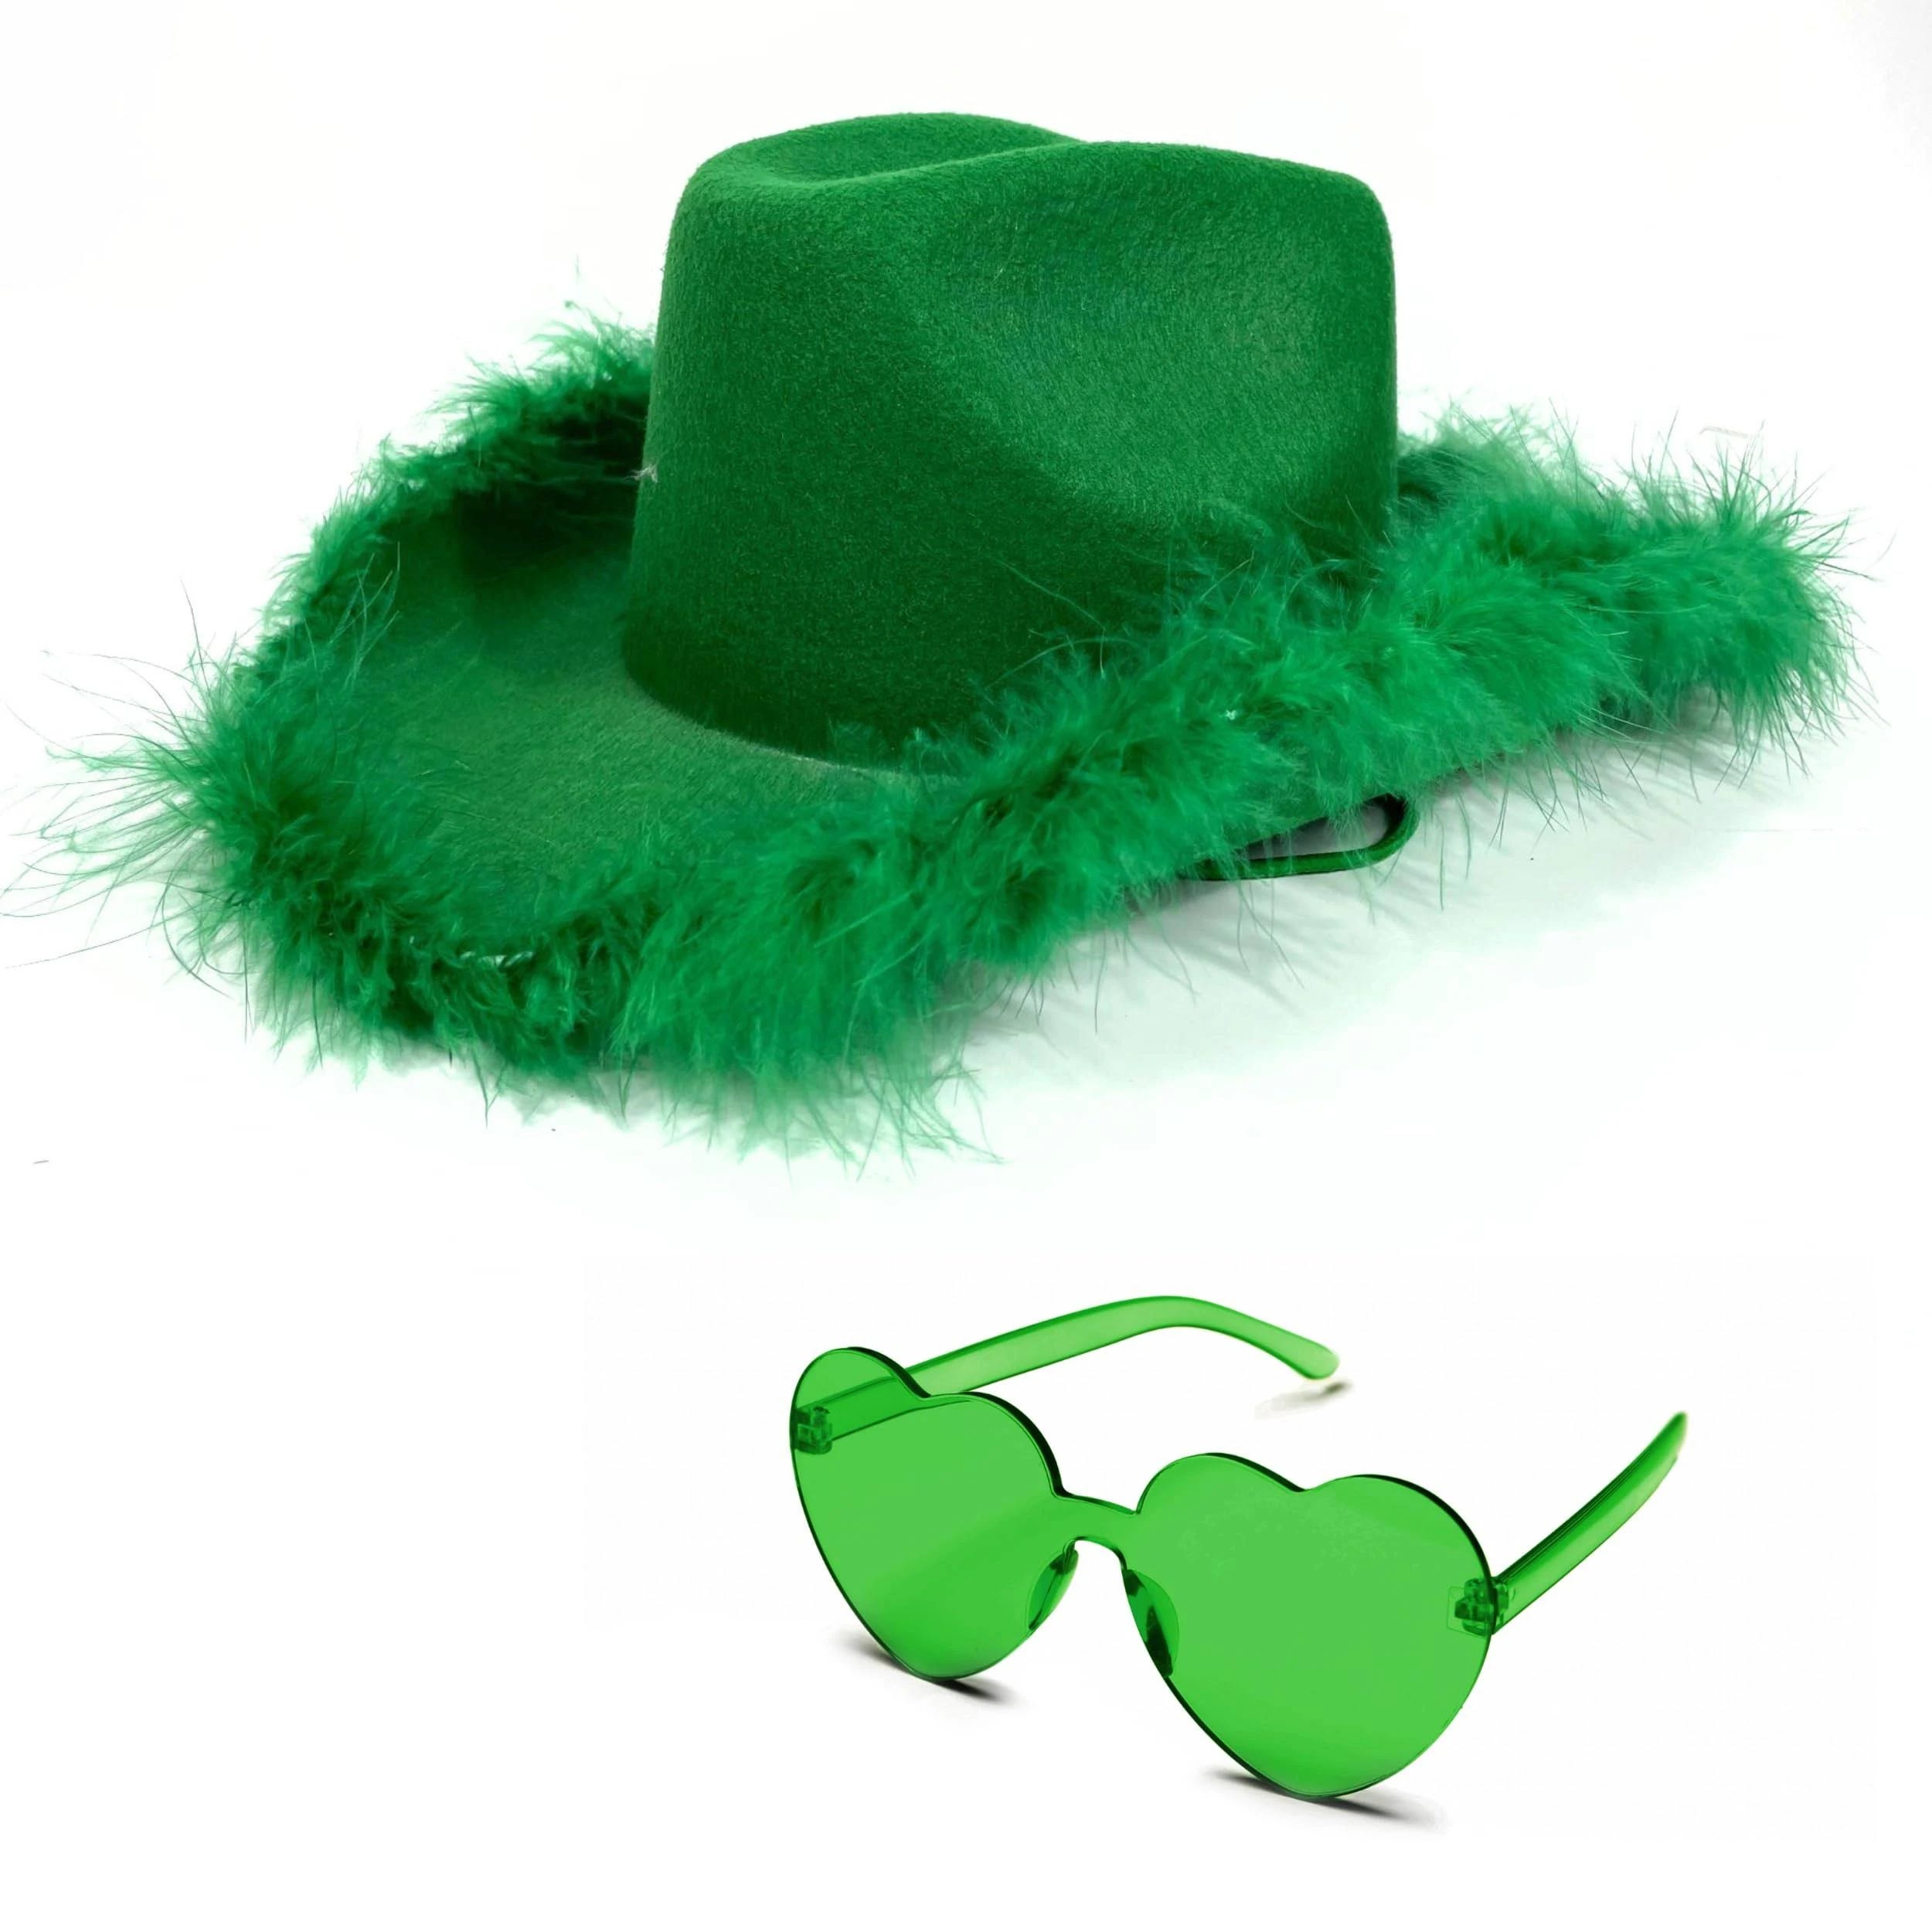 Feathered Felt Cowgirl Hat with Heart-Shaped Sunglasses | Image